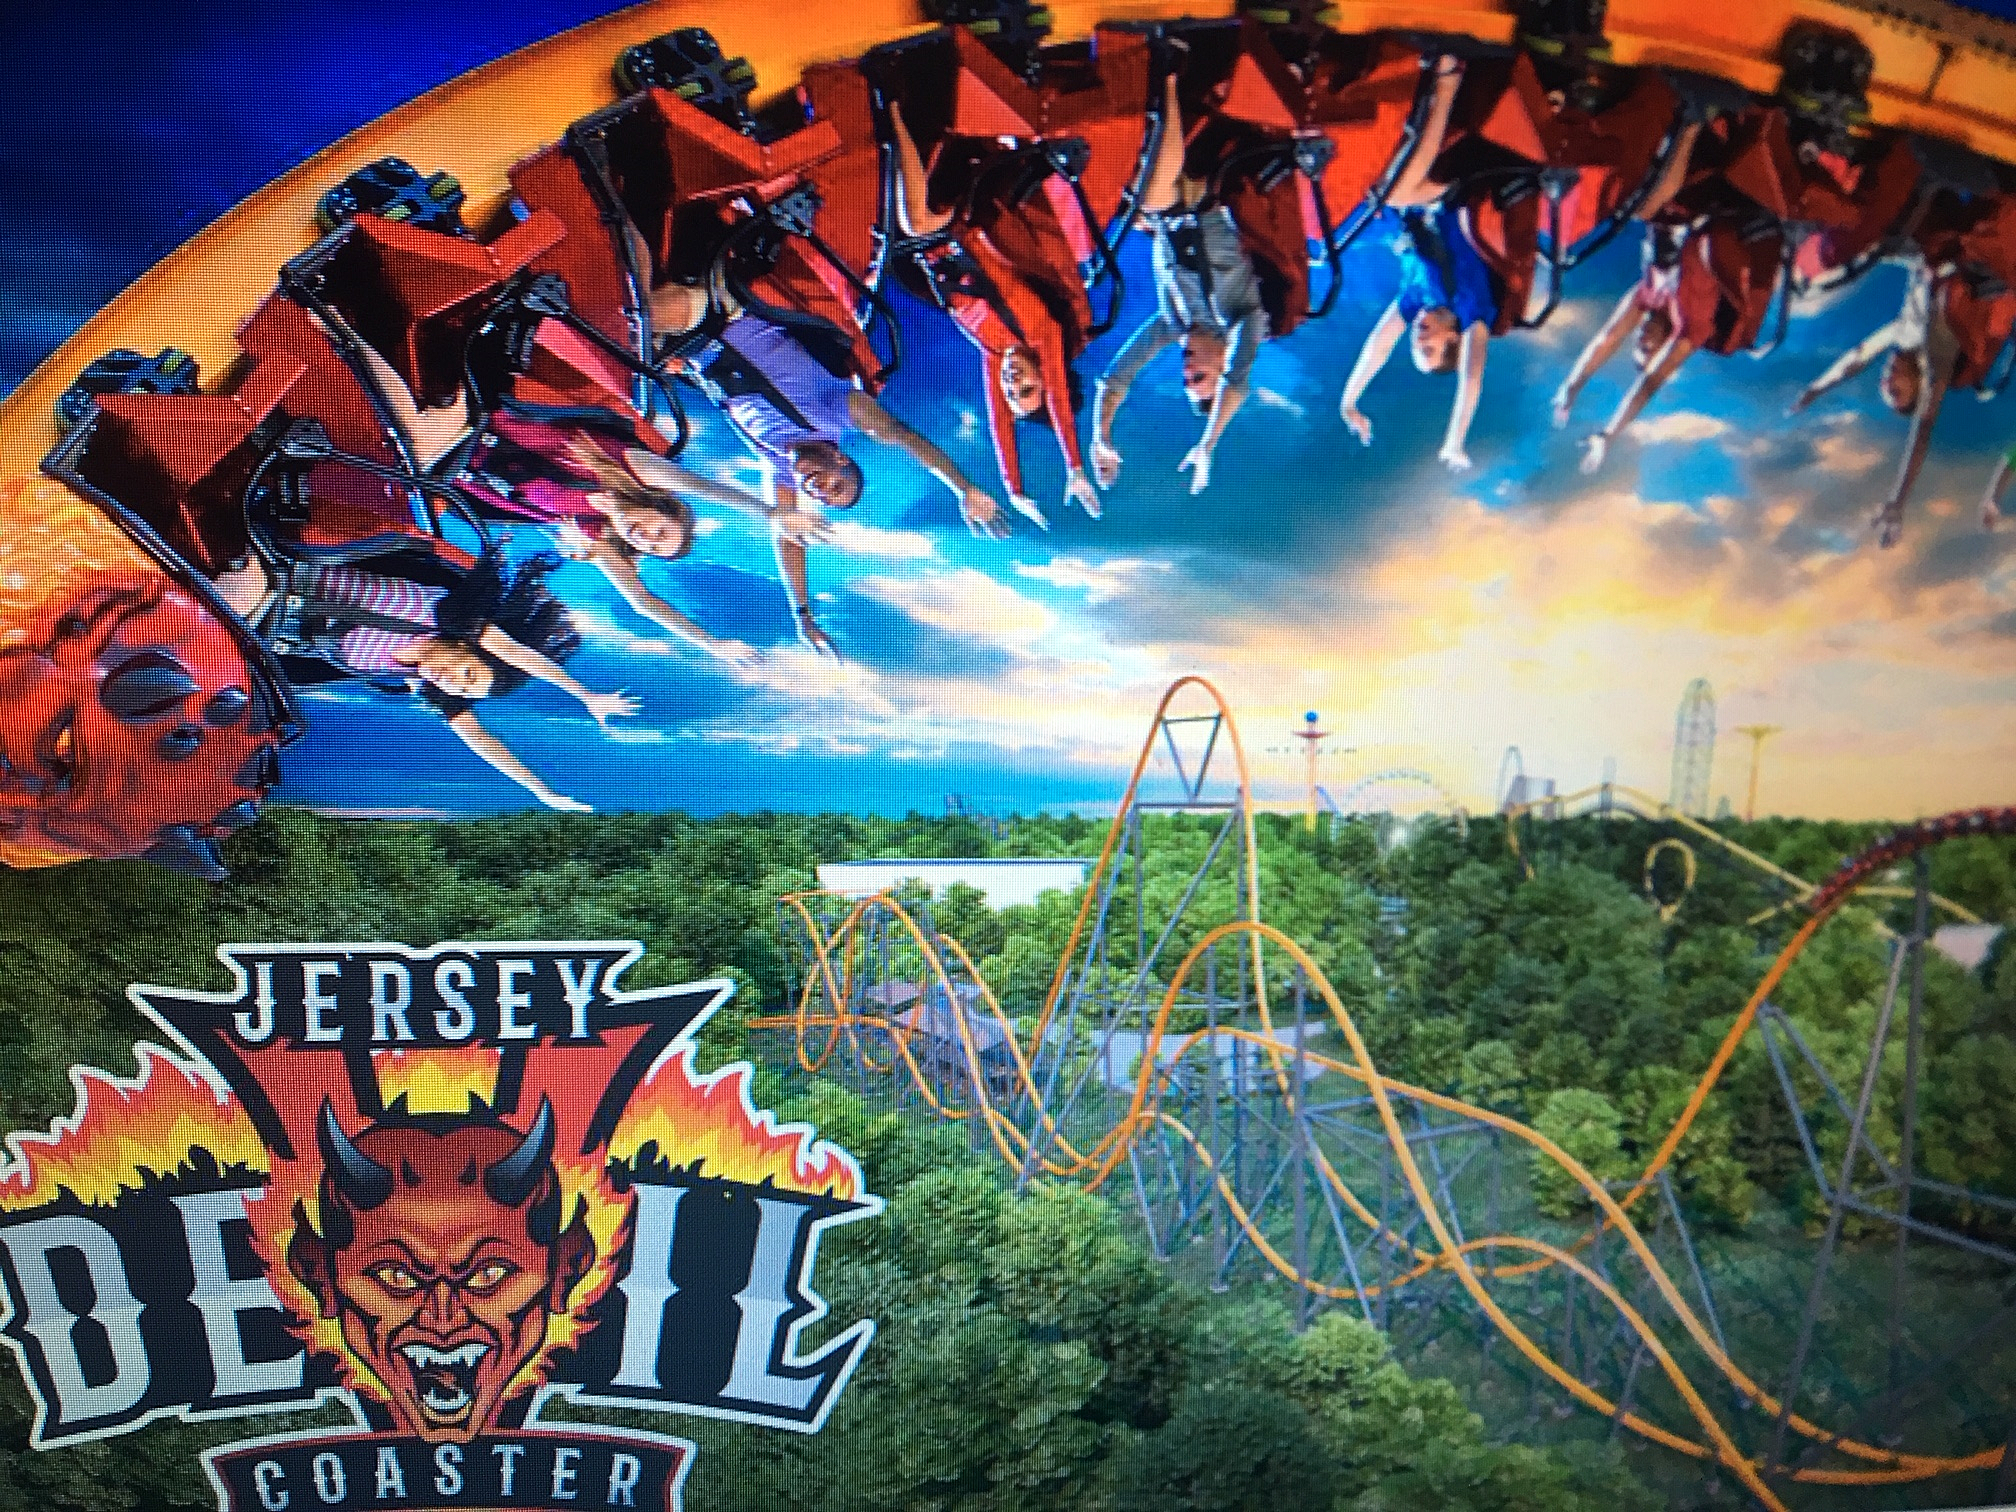 We ride the Jersey Devil Coaster